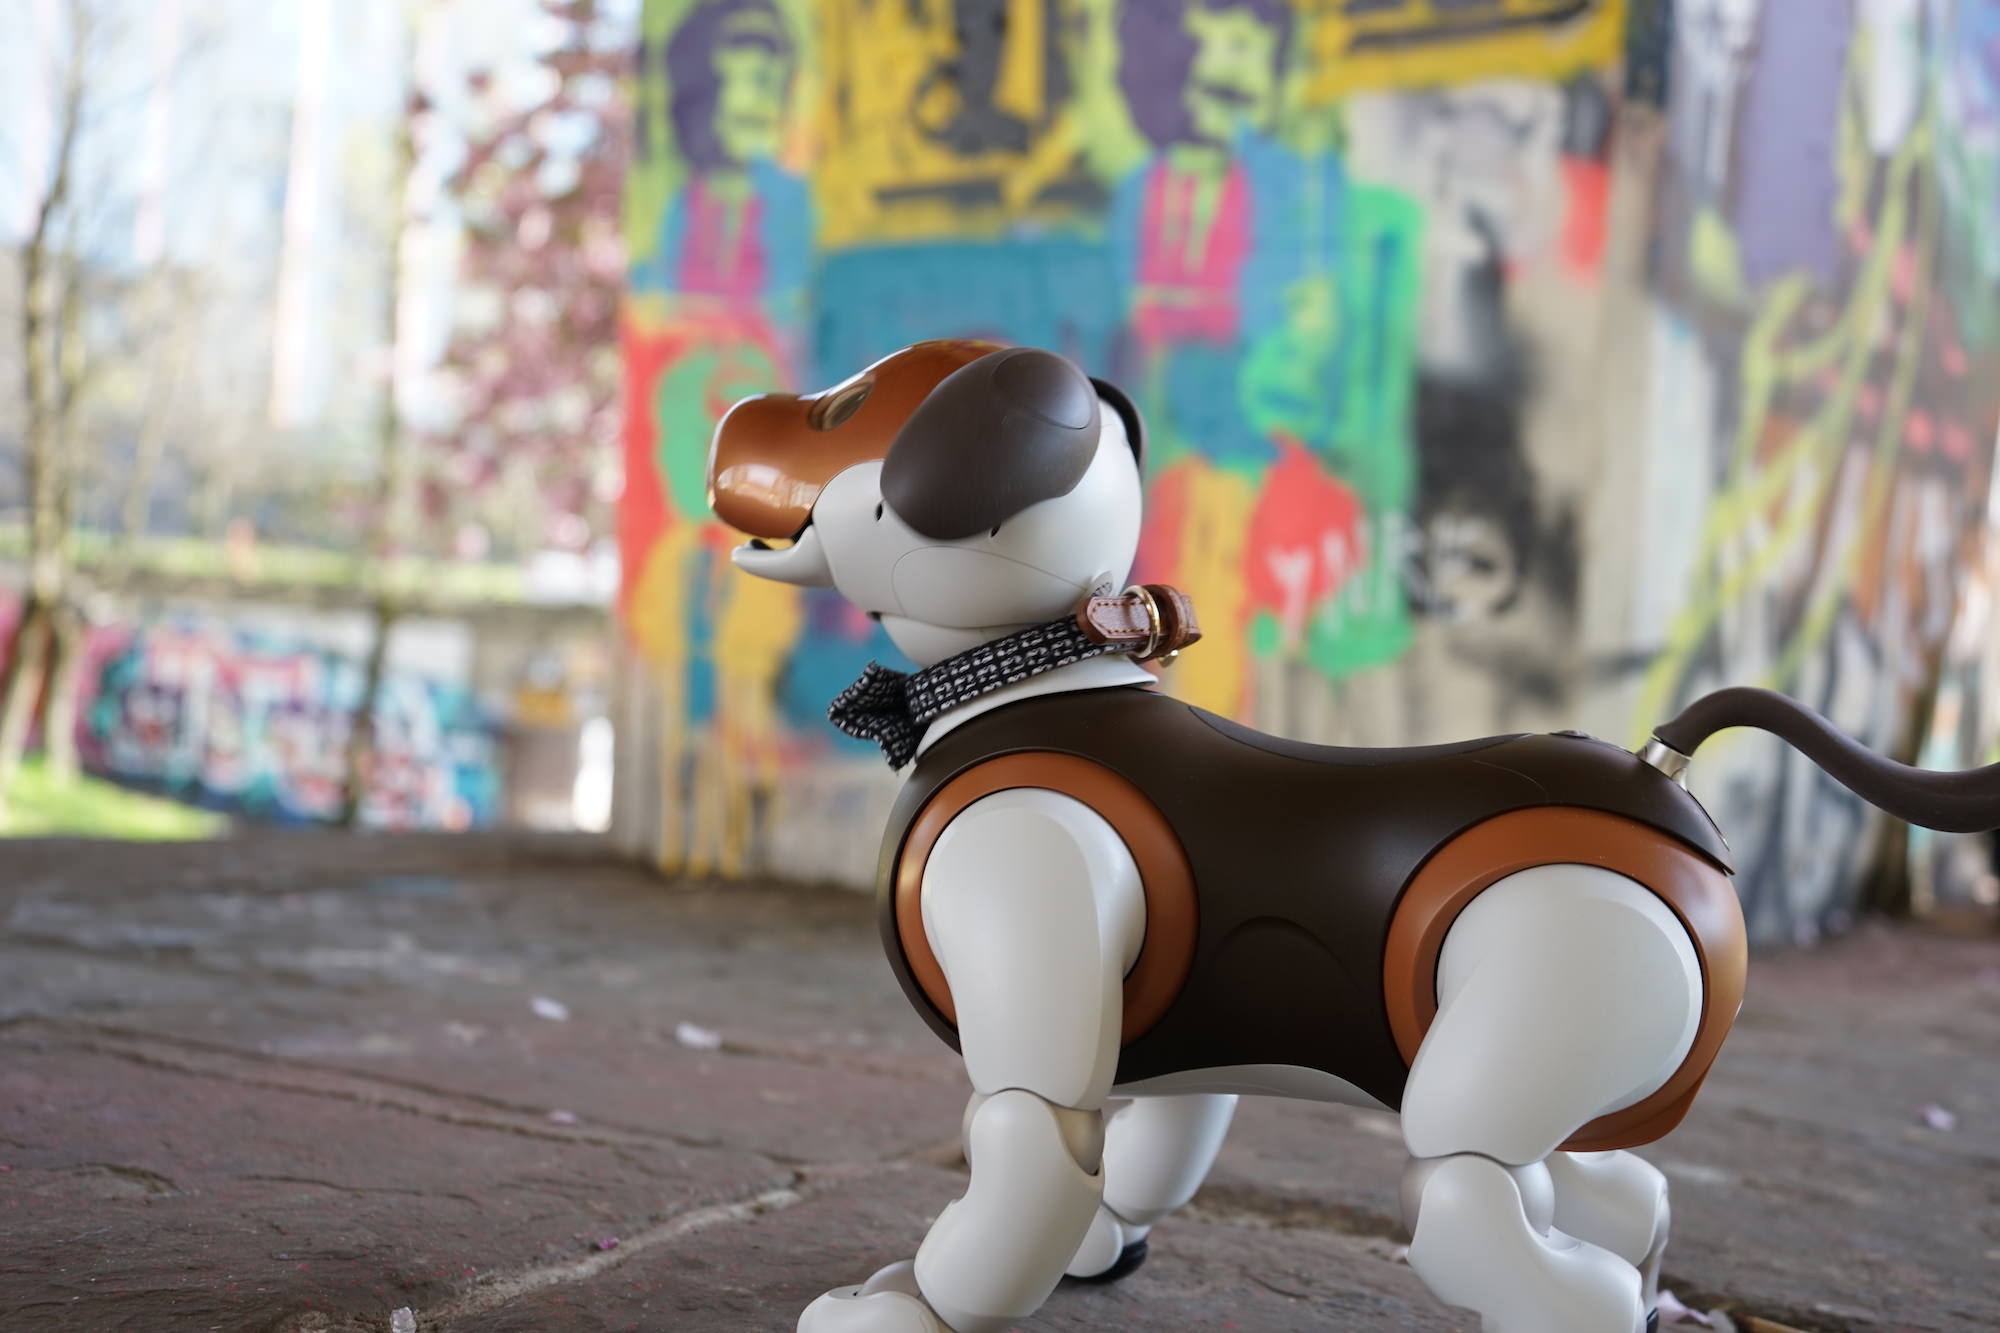 Kelly Stanford's aibo Laika travels to many places with him